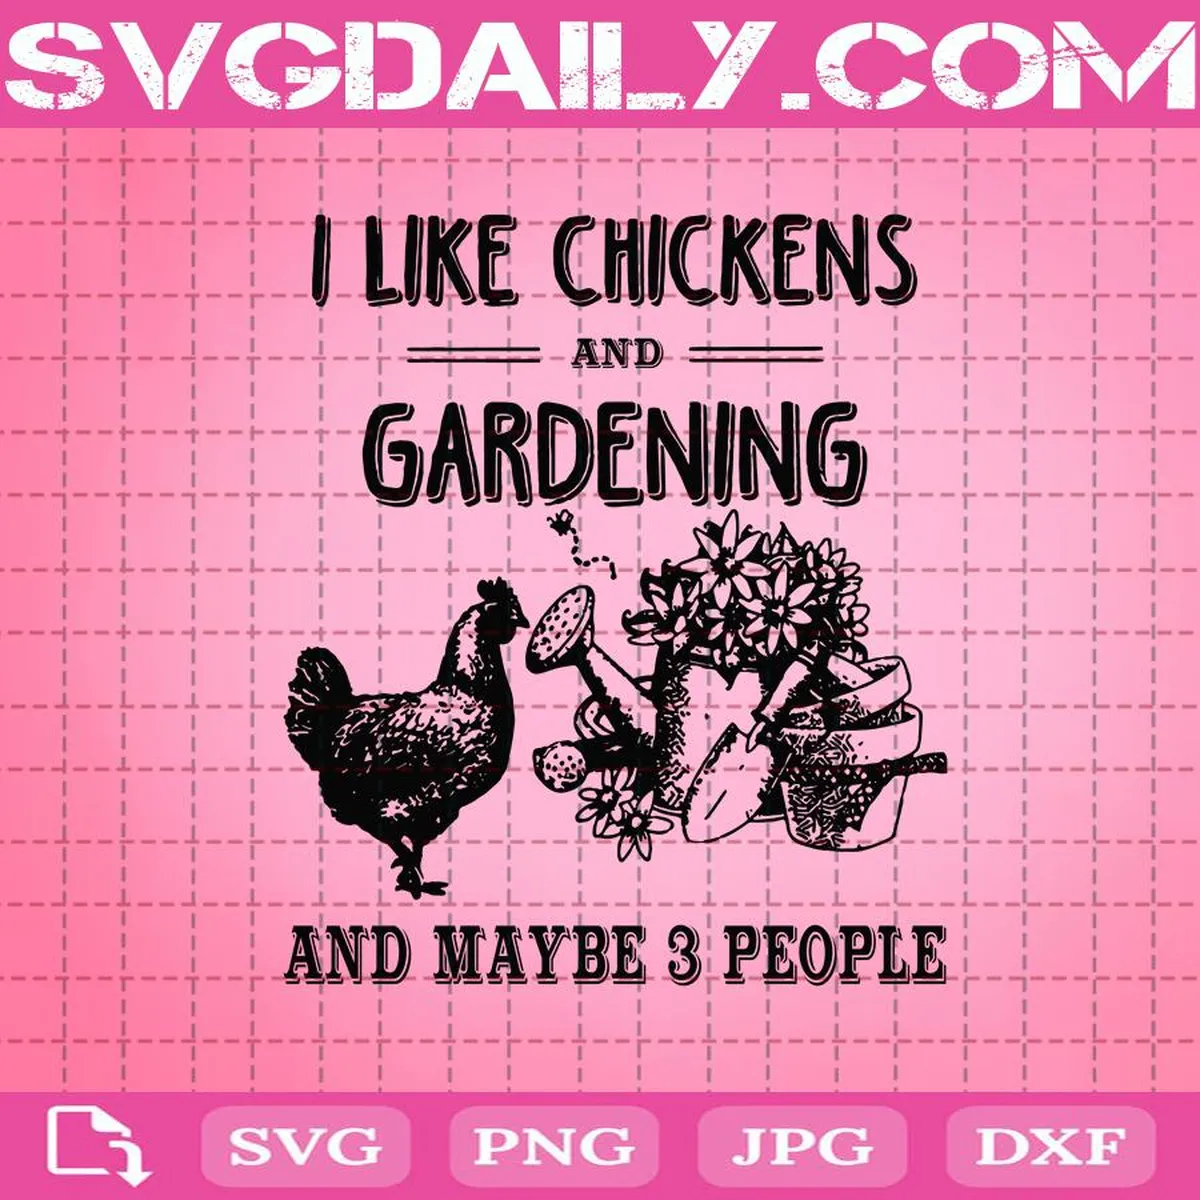 I Like Chickens And Gardening And Maybe 3 People Svg, Chicken Svg, Chicken Farm Svg, Farm Svg, Gardening Svg